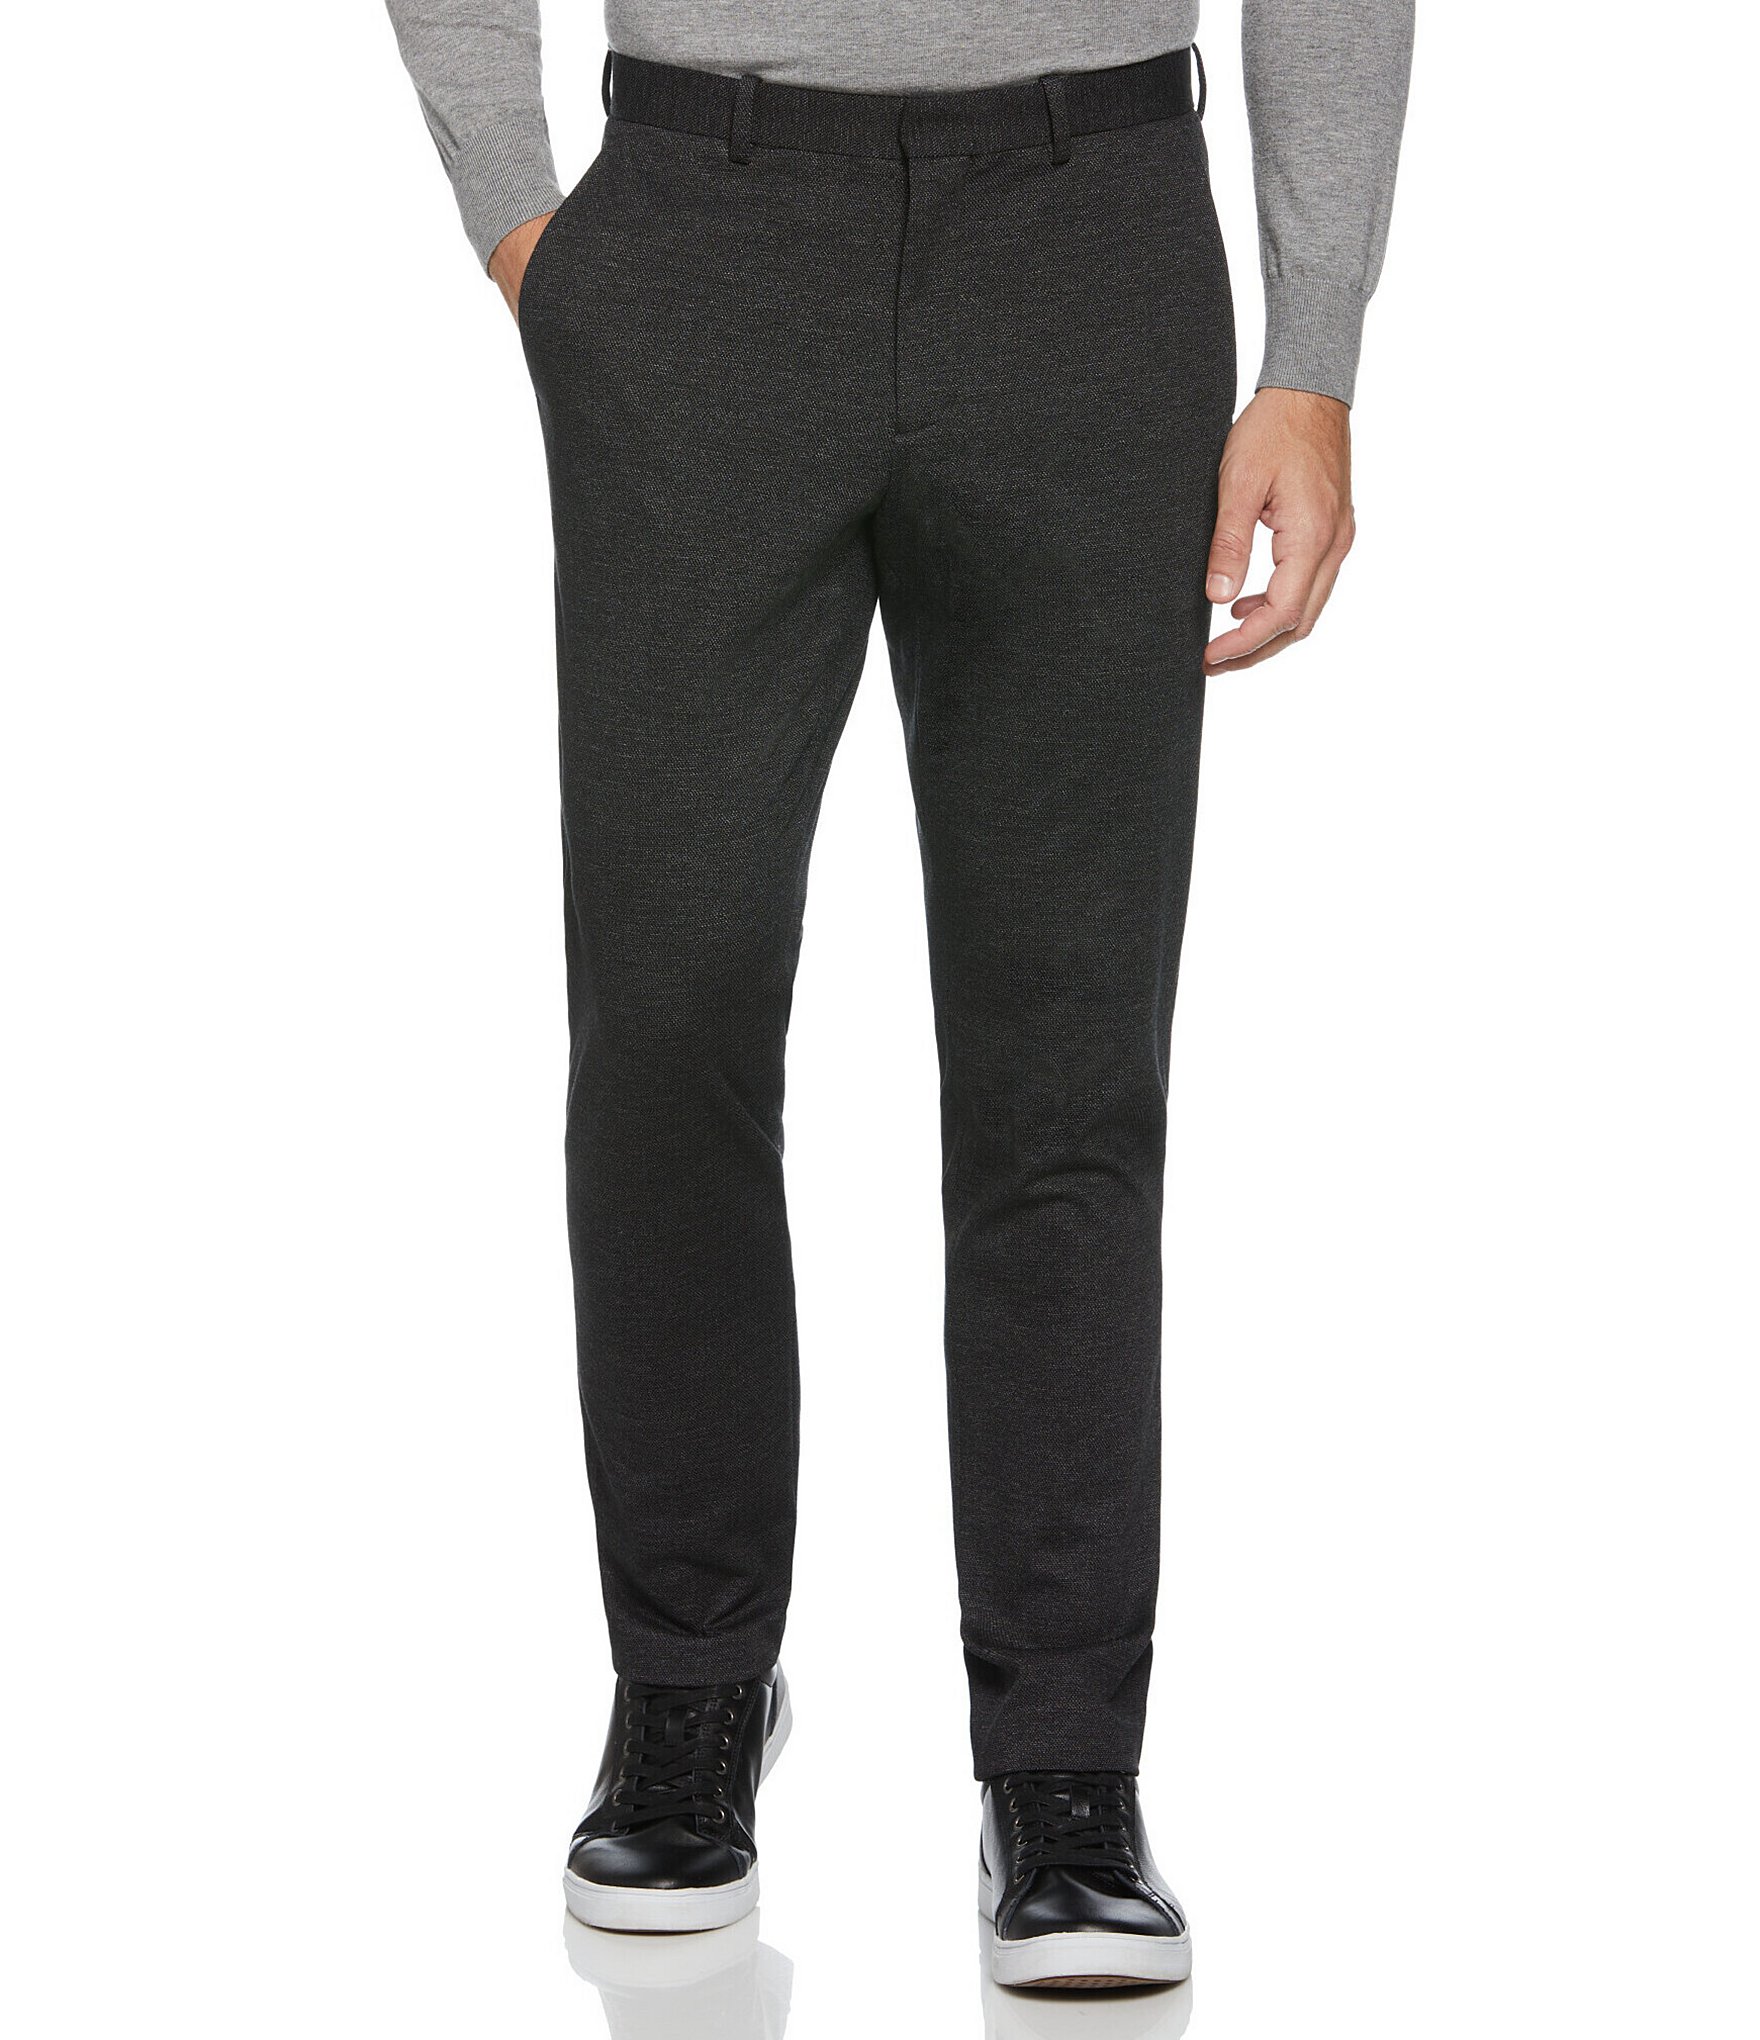 Buy Perry Ellis Men's Slim Fit Solid Stretch Pant, Charcoal Heather, 30W x  32L at Amazon.in